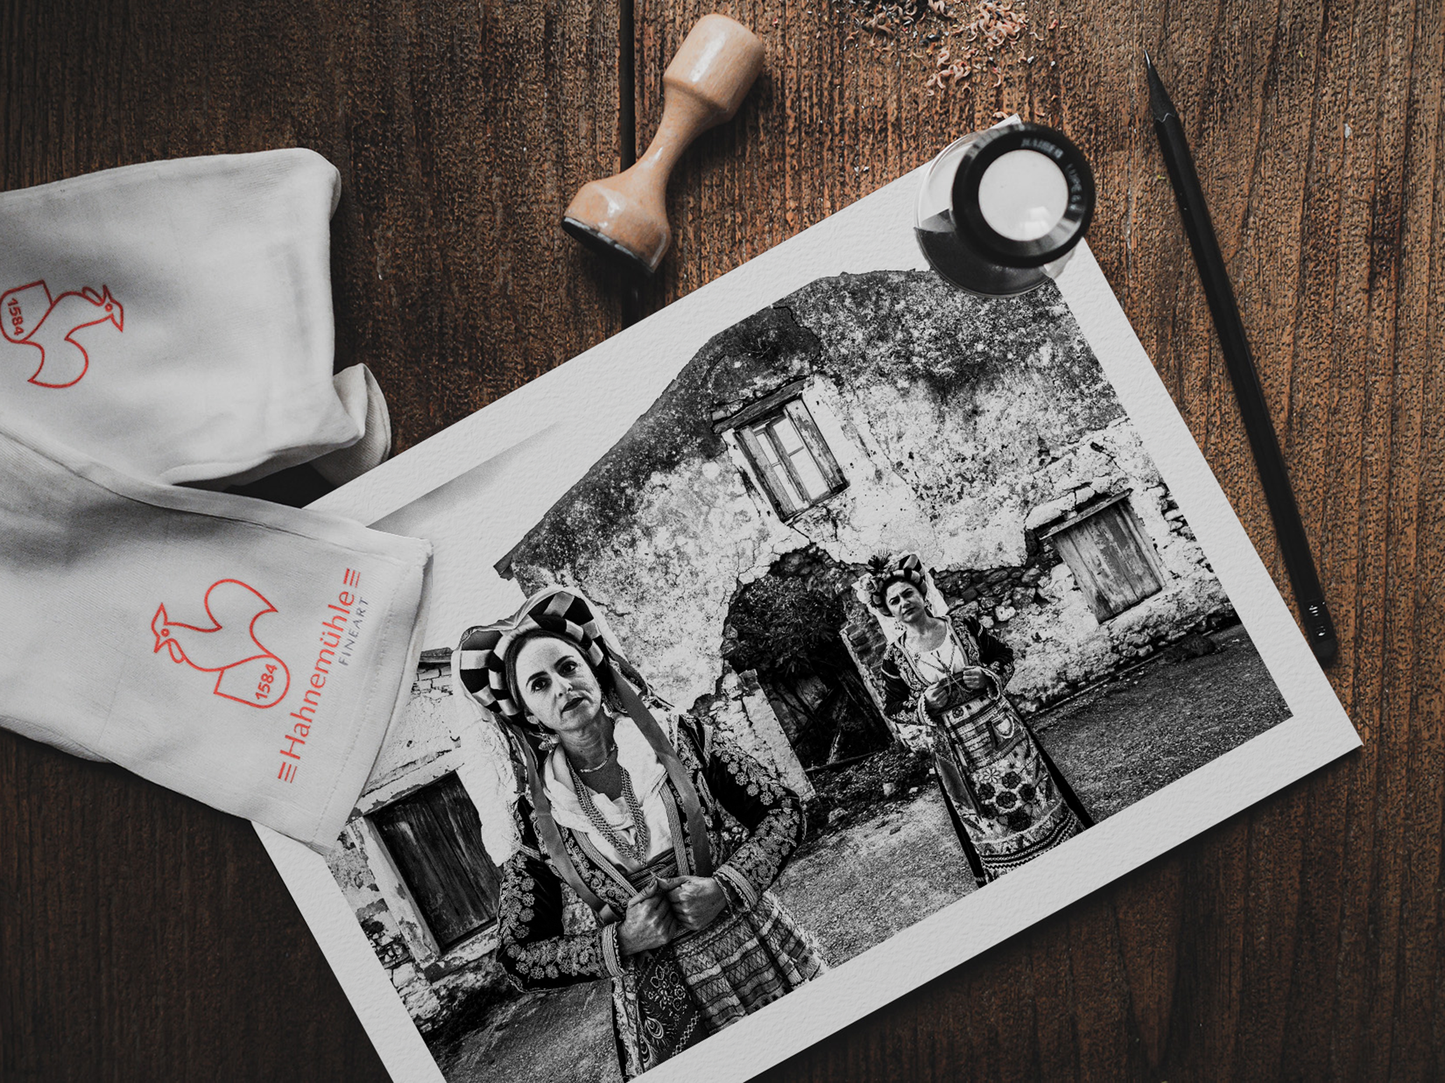 Black and White Photography Wall Art Greece | Costumes of southern Corfu island in front a traditional house Ionian Sea by George Tatakis - photo print on table